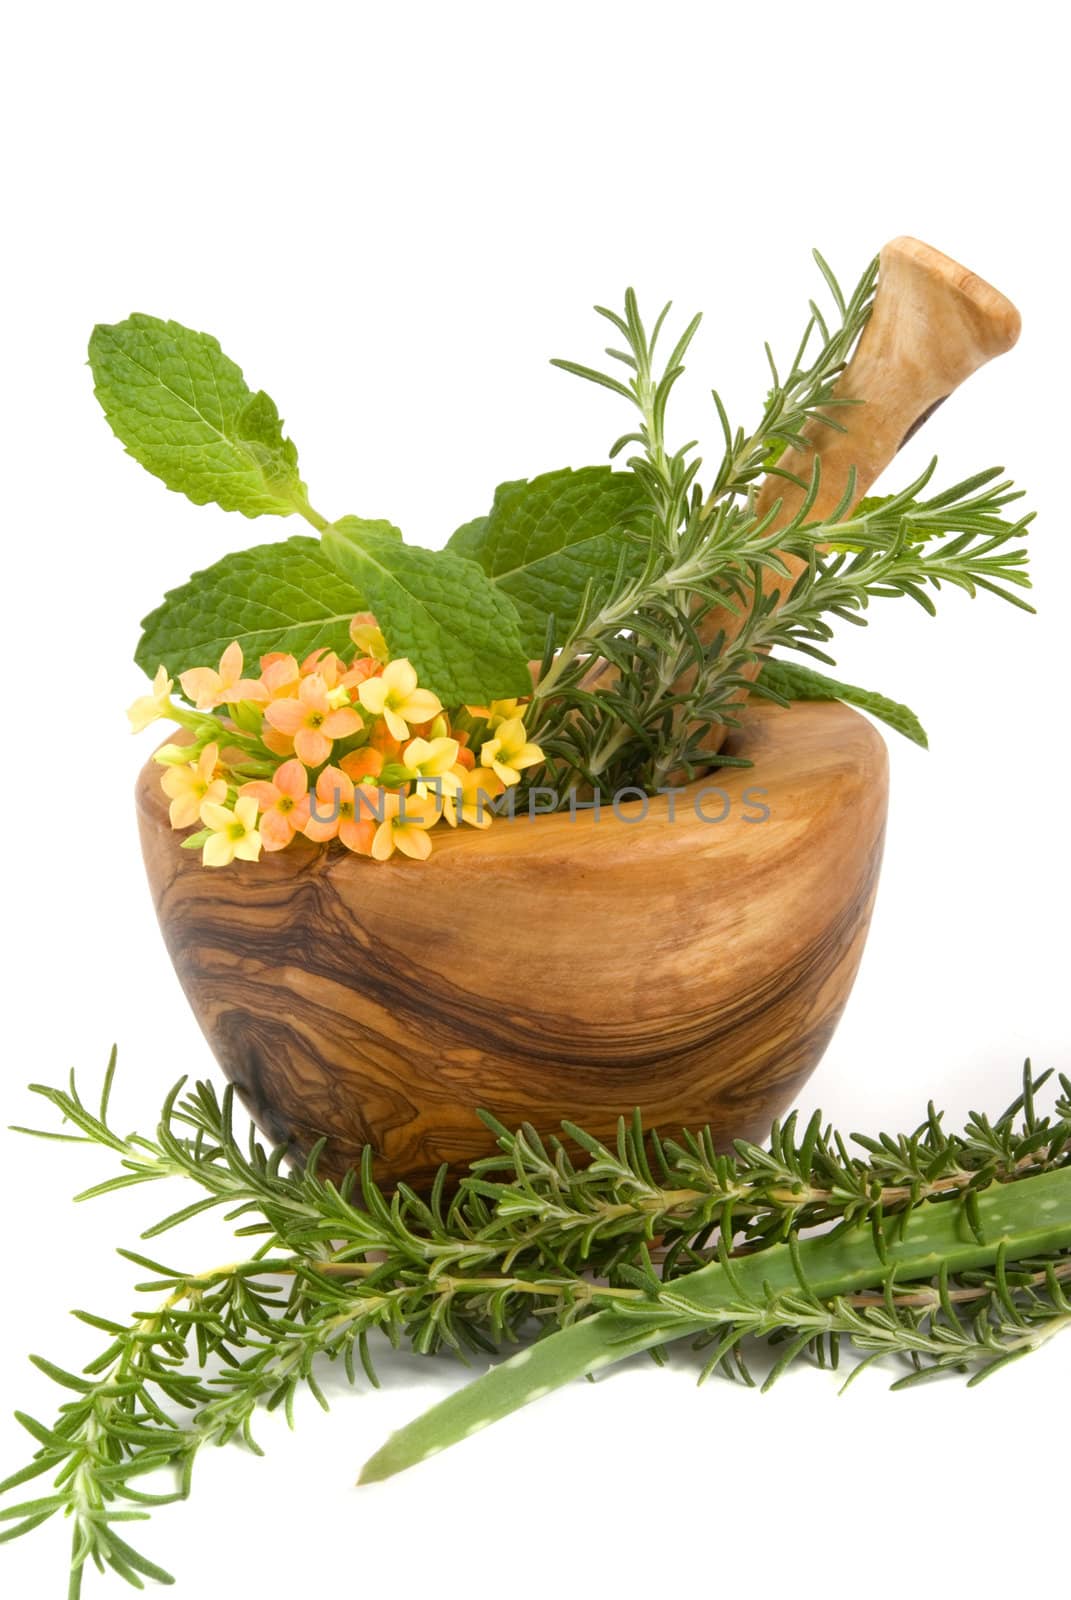 Healthy aromatic herbs in a spa (mint, rosemary, aloe vera in a carved olive tree mortar and pestle